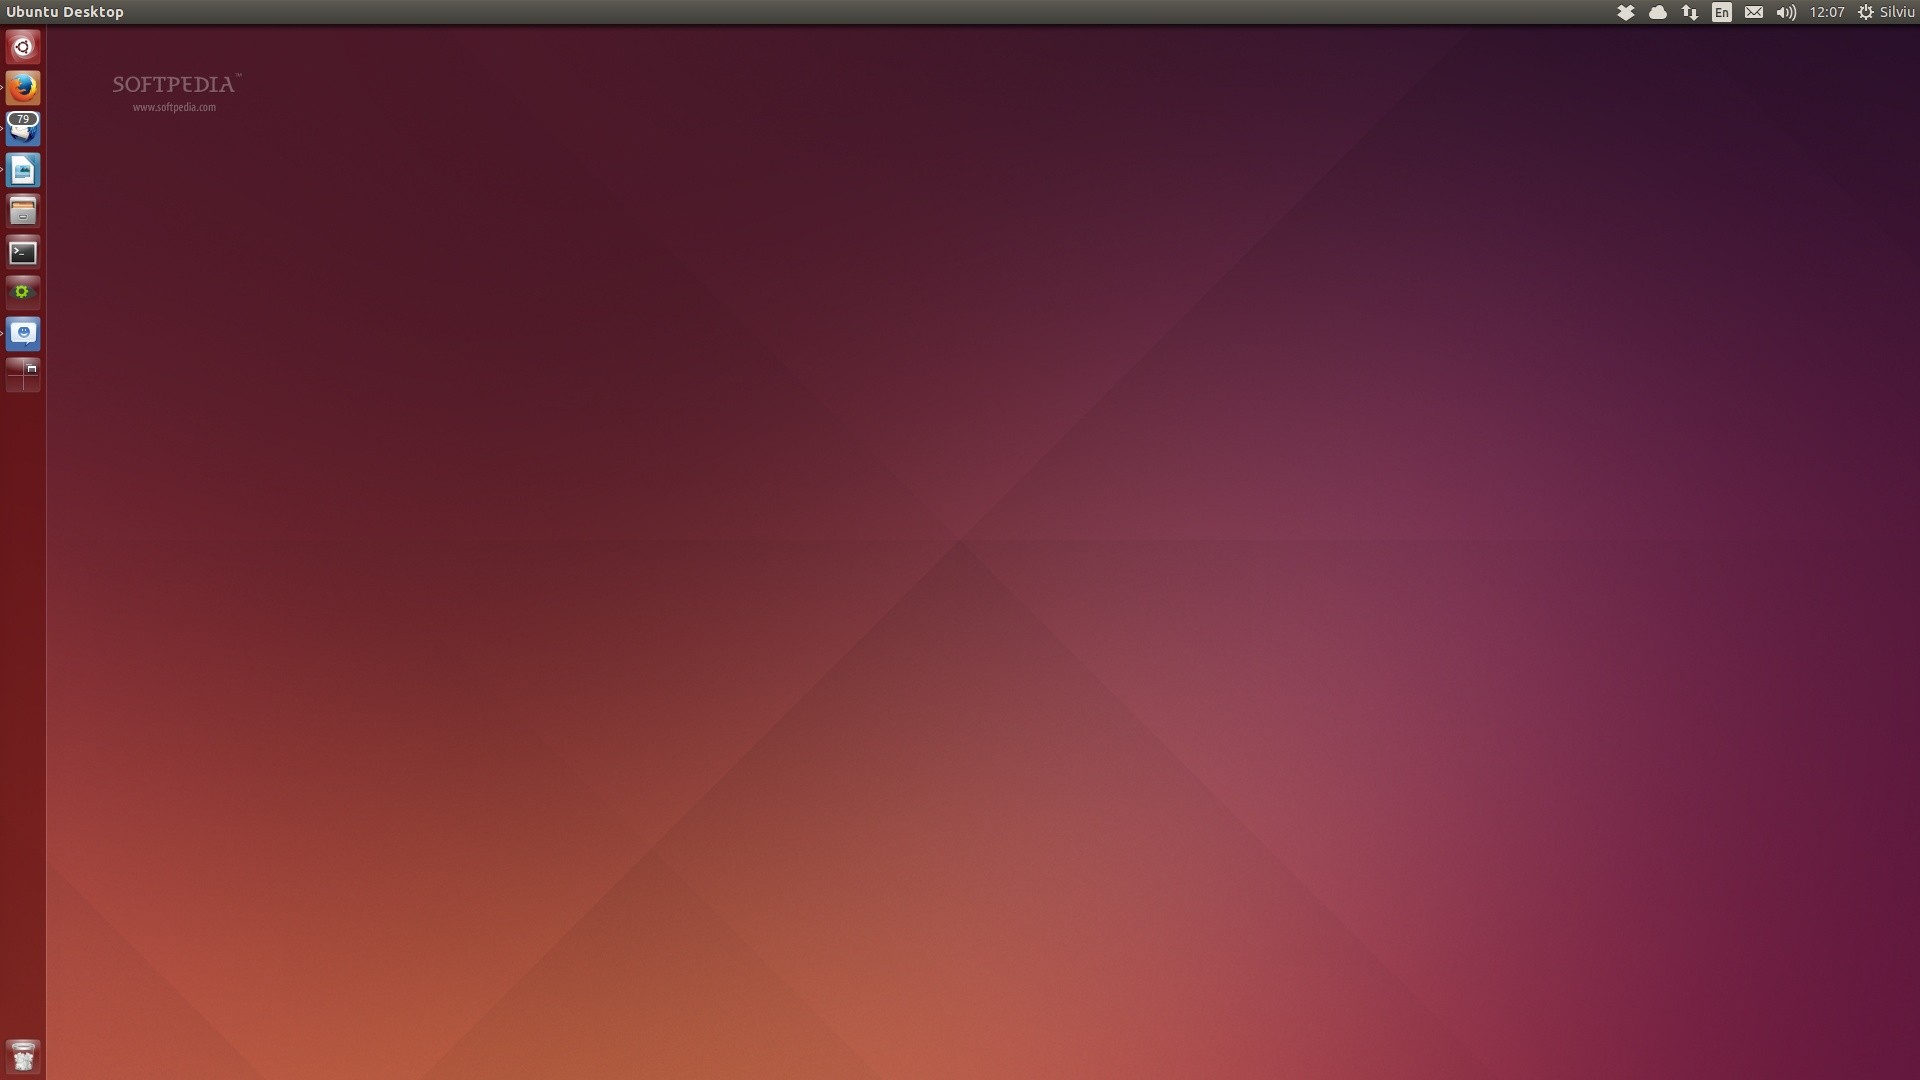 Second Edition of Ubuntu Manual 14.04 LTS Is Out